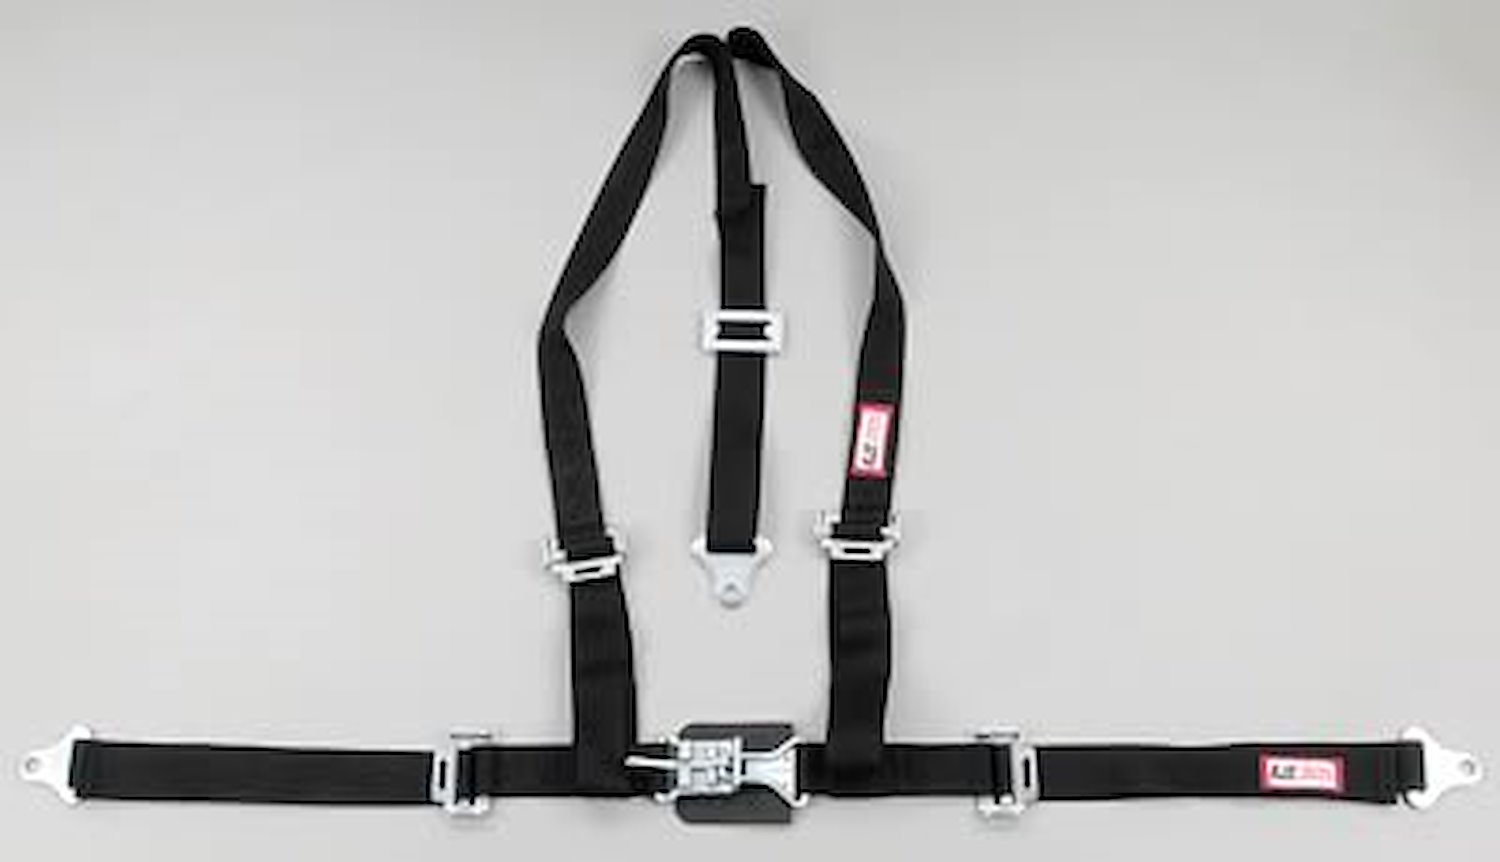 NON-SFI L&L HARNESS 3 PULL DOWN Lap Belt w/adjuster 2 S.H. Individual FLOOR Mount ALL WRAP ENDS BLACK